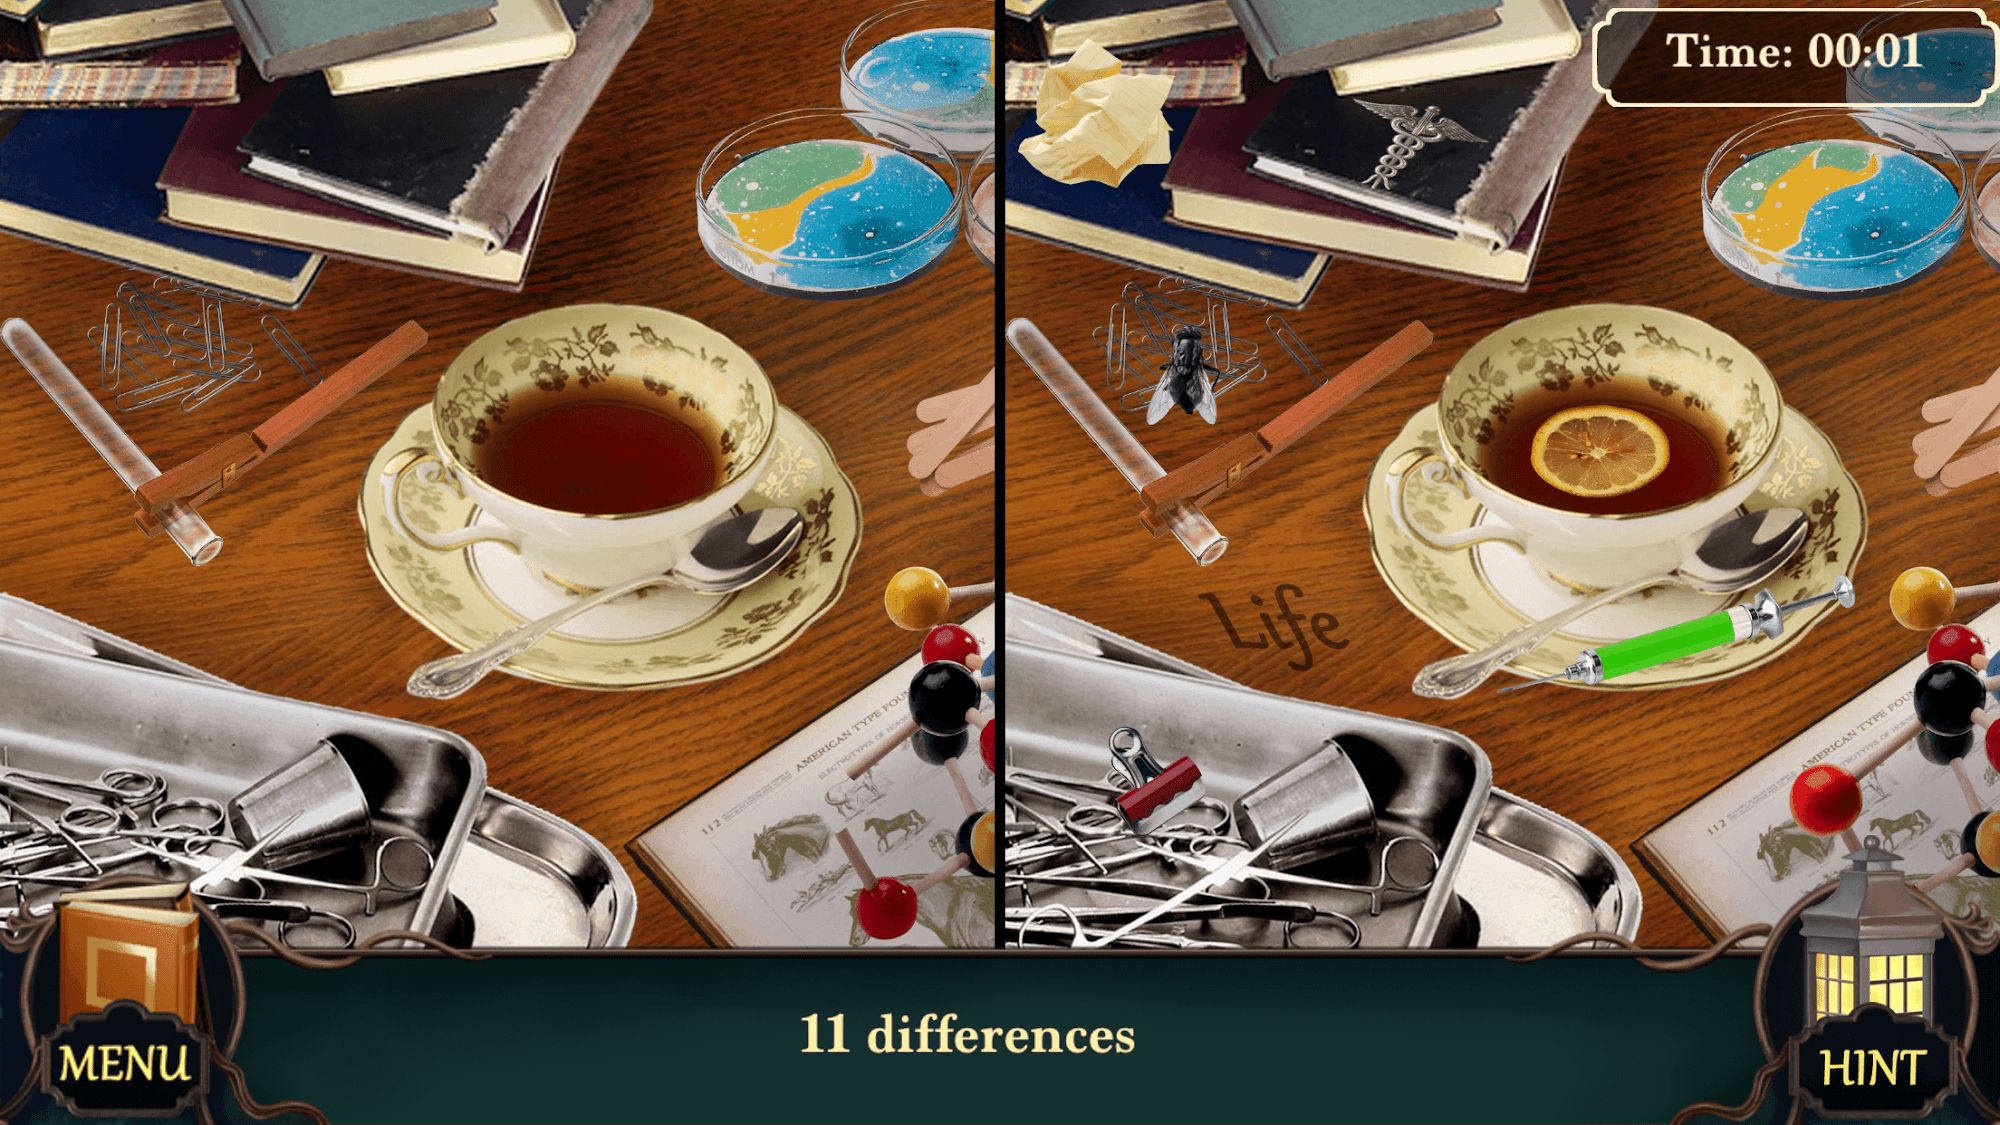 Mystery Hotel - Seek and Find Hidden Objects Games - Android game screenshots.